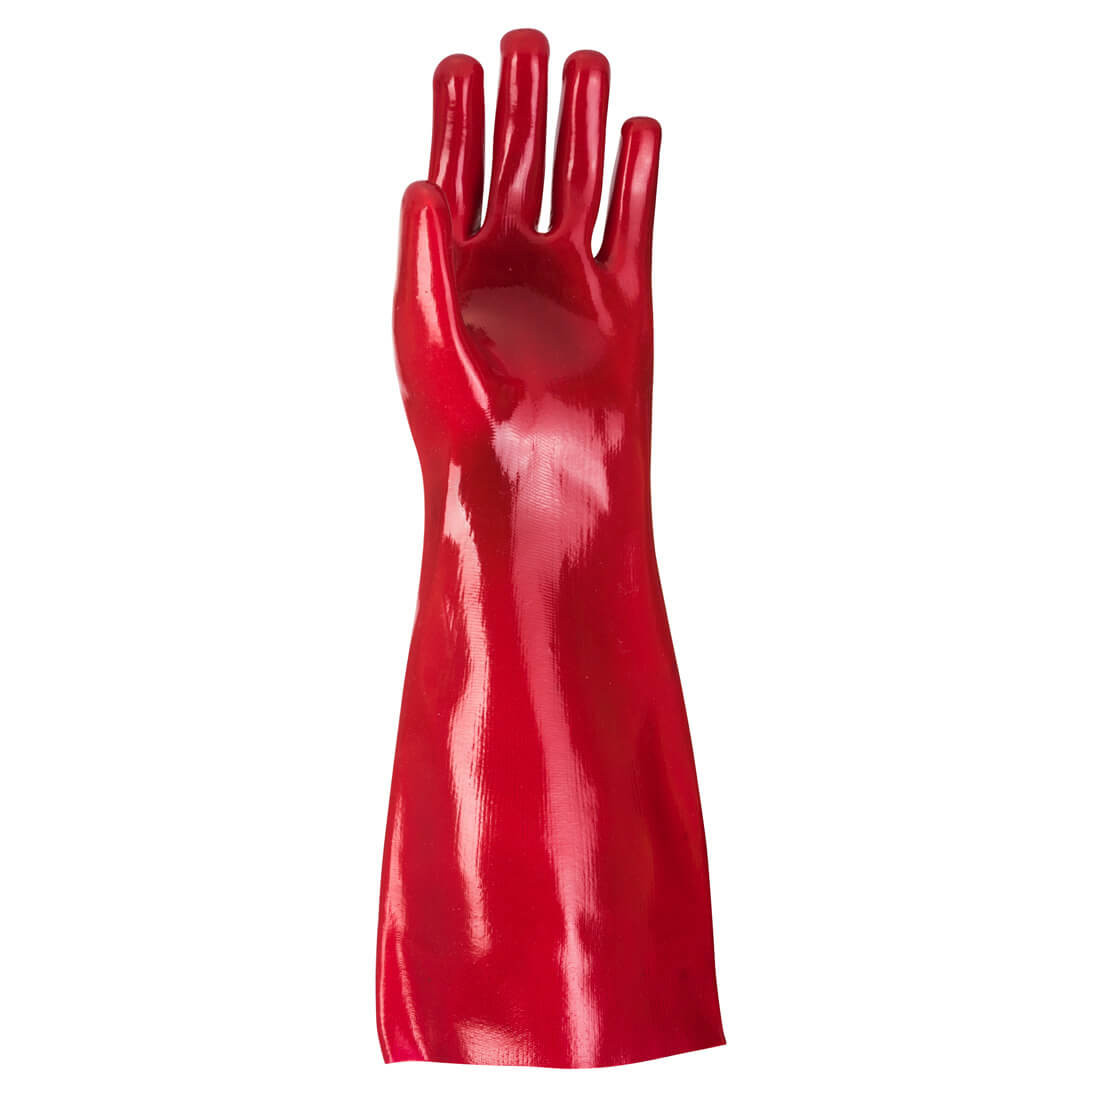 PVC Gauntlet - Personal protection